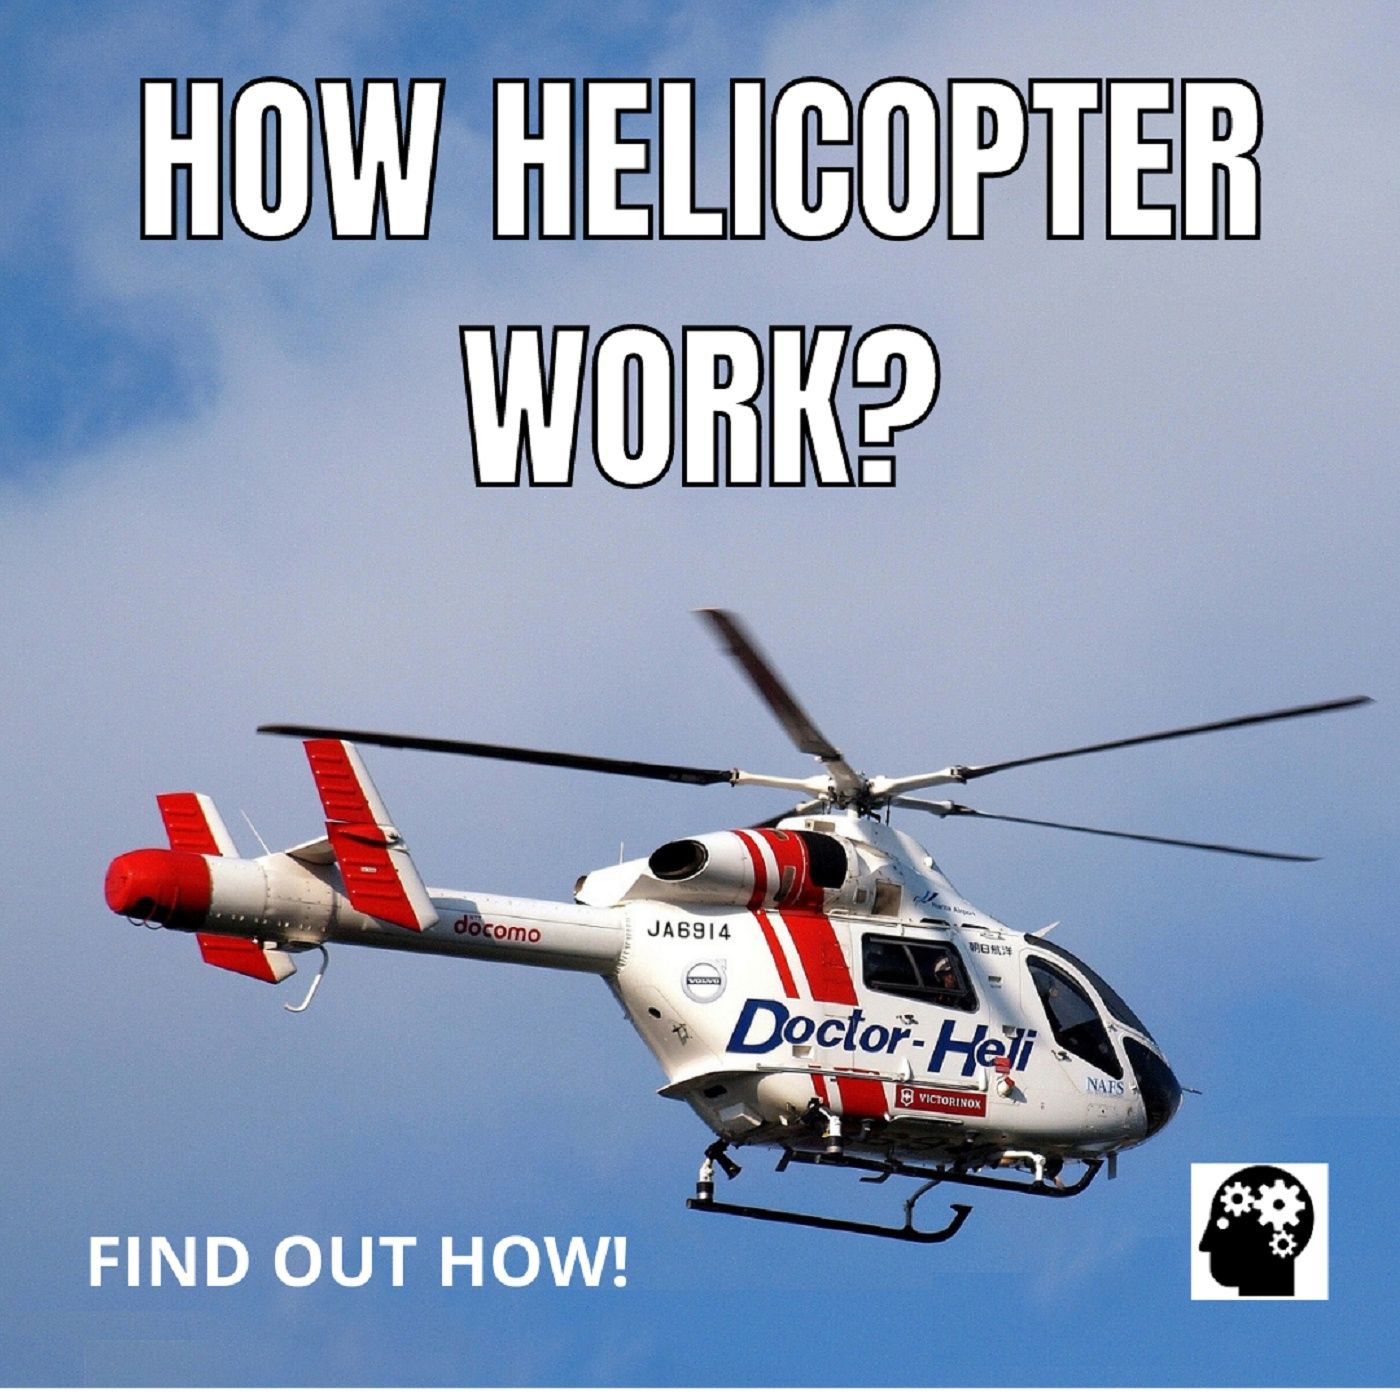 How Helicopter Work?